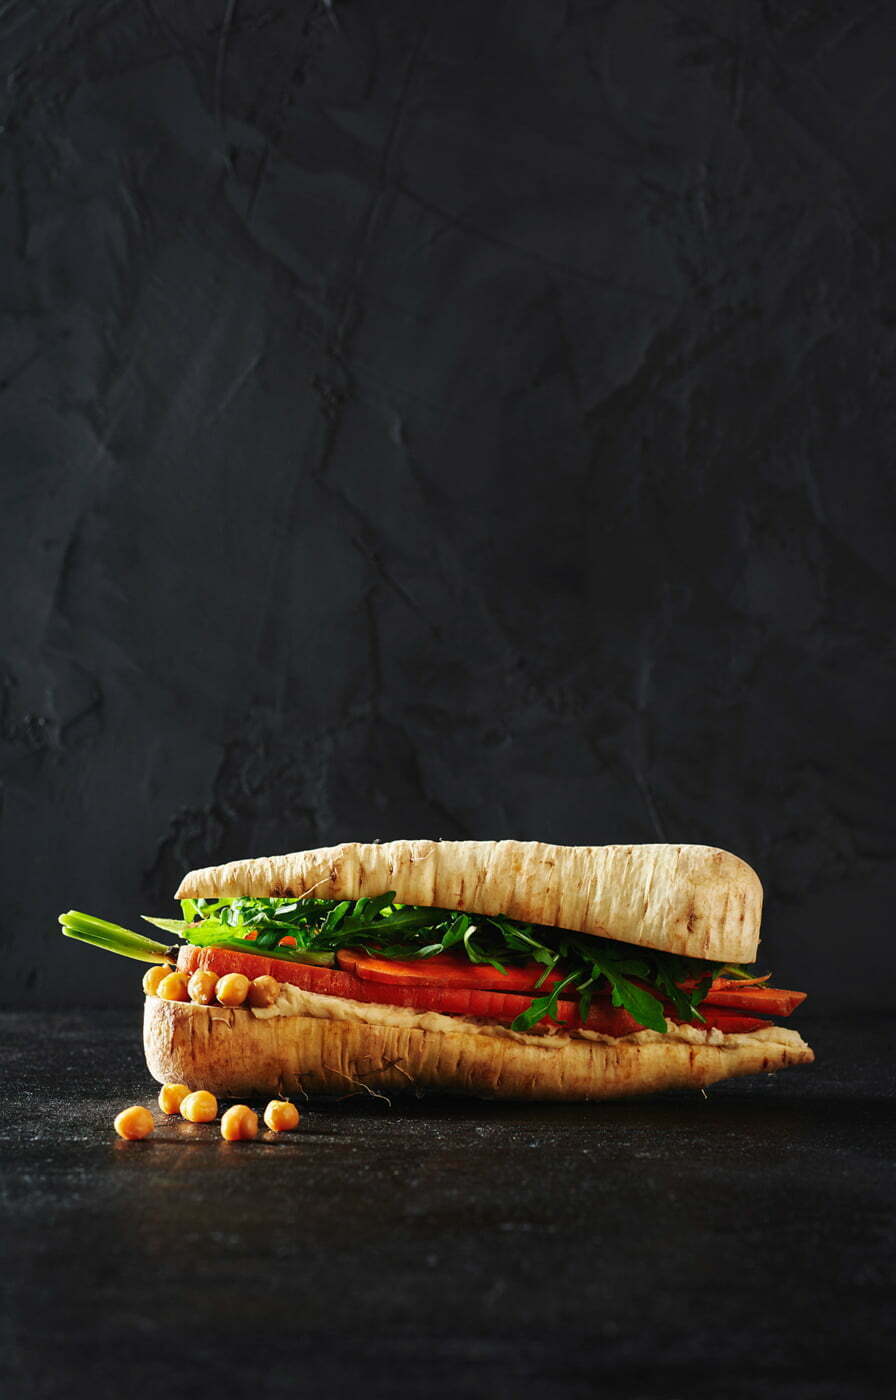 A_Parsnip_with_chickpeas,_carrots_and_rucola_on_a_dark_background_by_Elina_Himanen